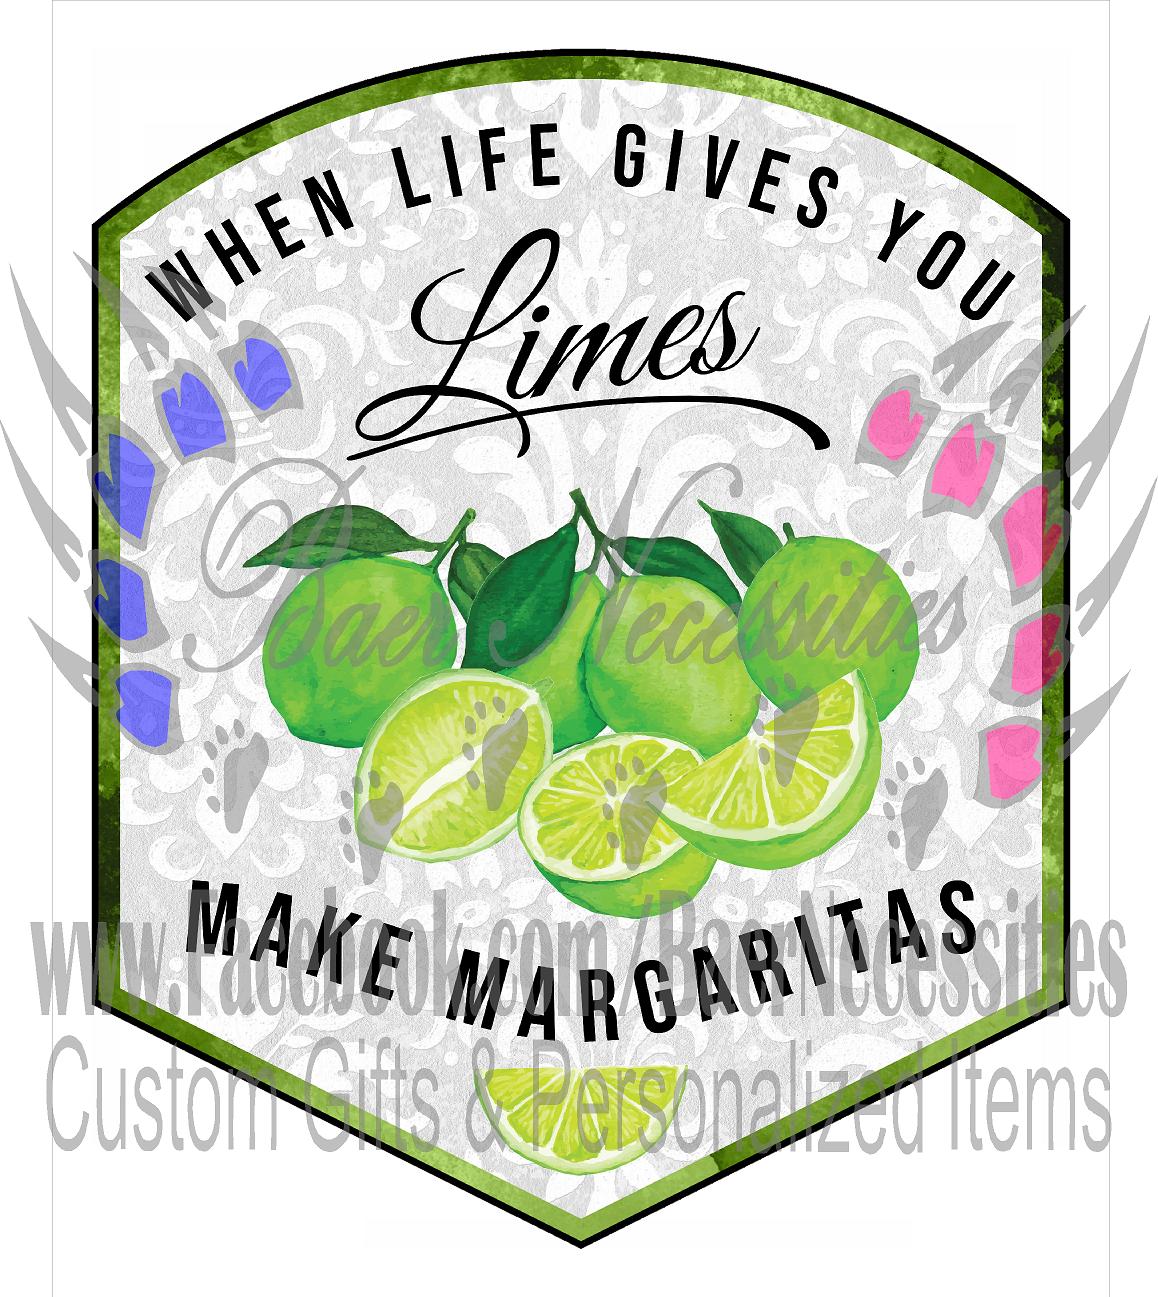 When Life Gives you Limes, Make Margaritas Label - Tumber decal